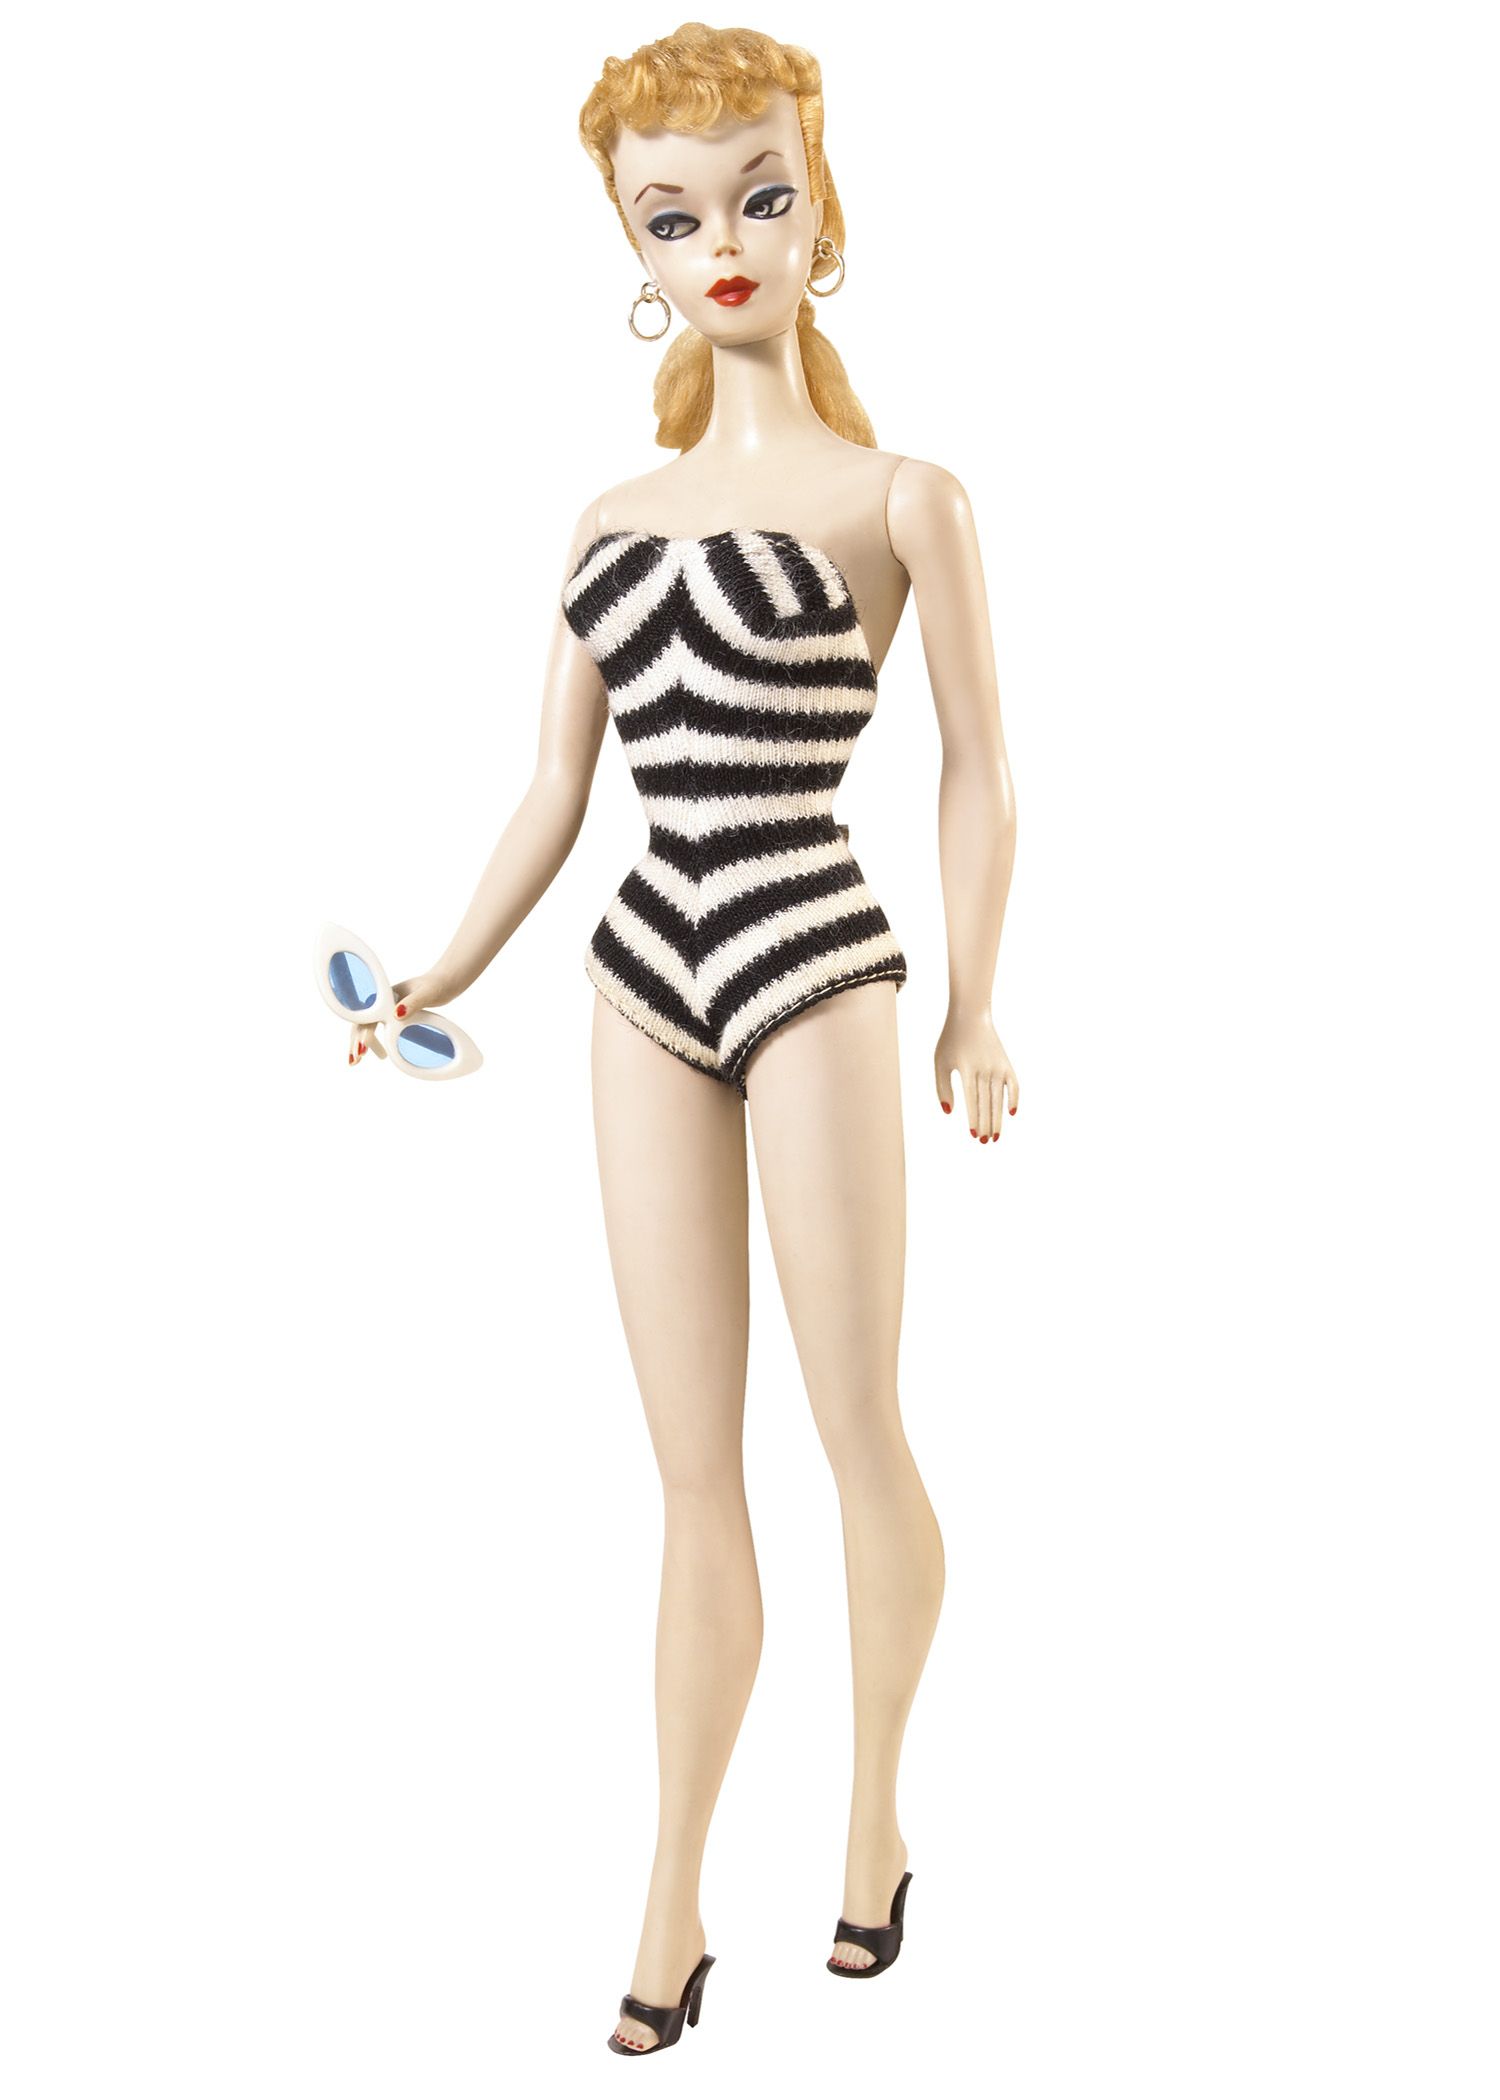 11 Barbies Worth Owning